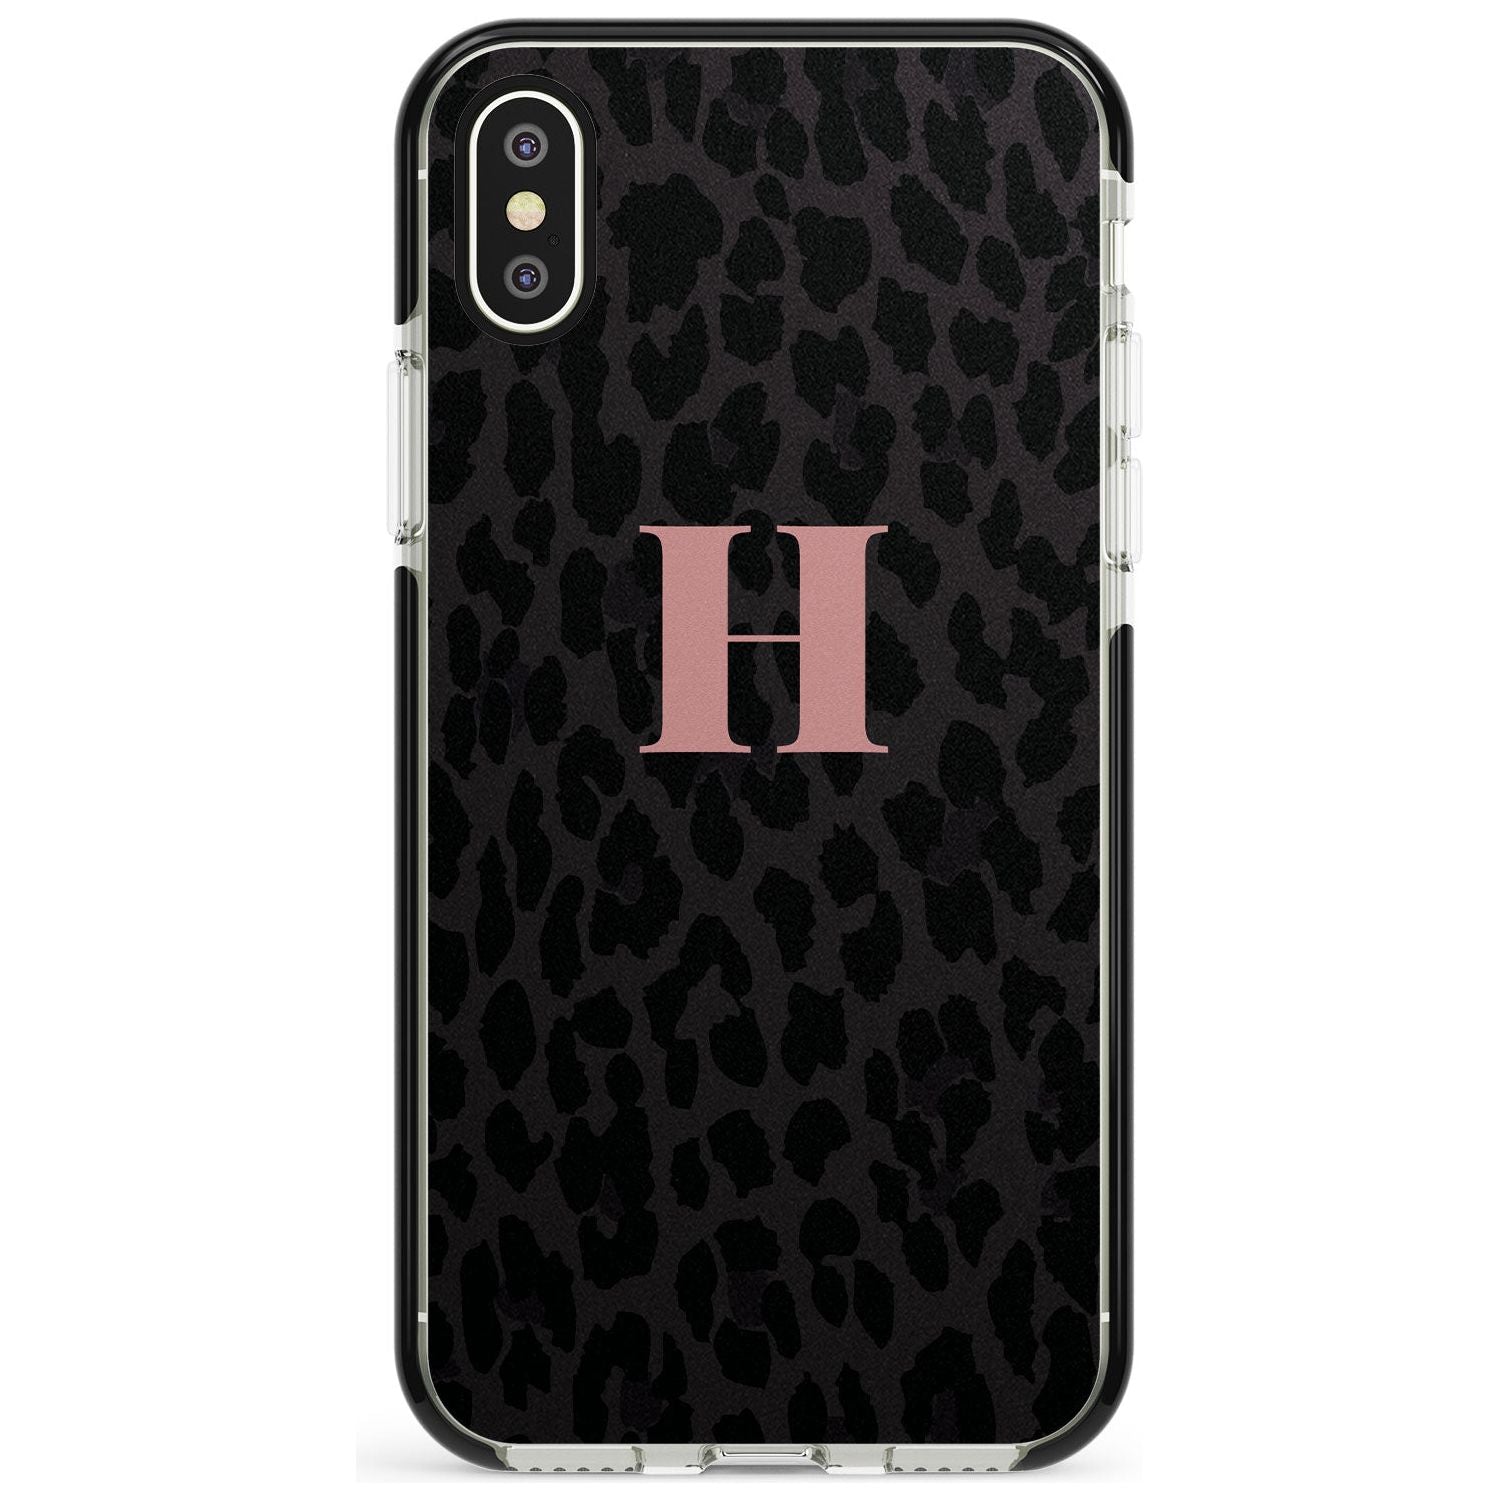 Small Pink Leopard Monogram Black Impact Phone Case for iPhone X XS Max XR